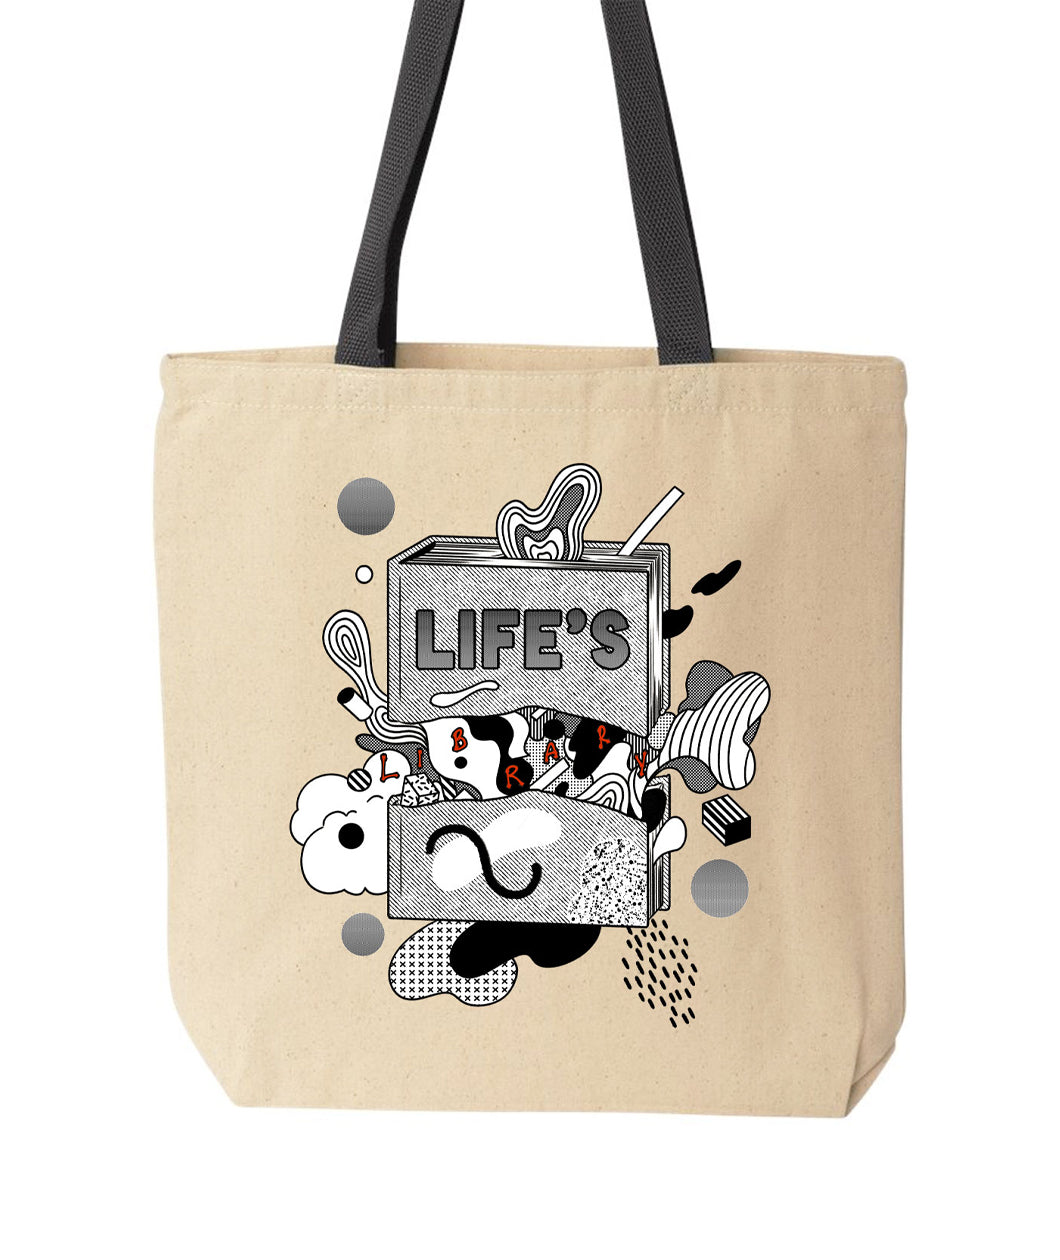 A canvas tote bag with a grey book the the words "Life's Library" on the book. 